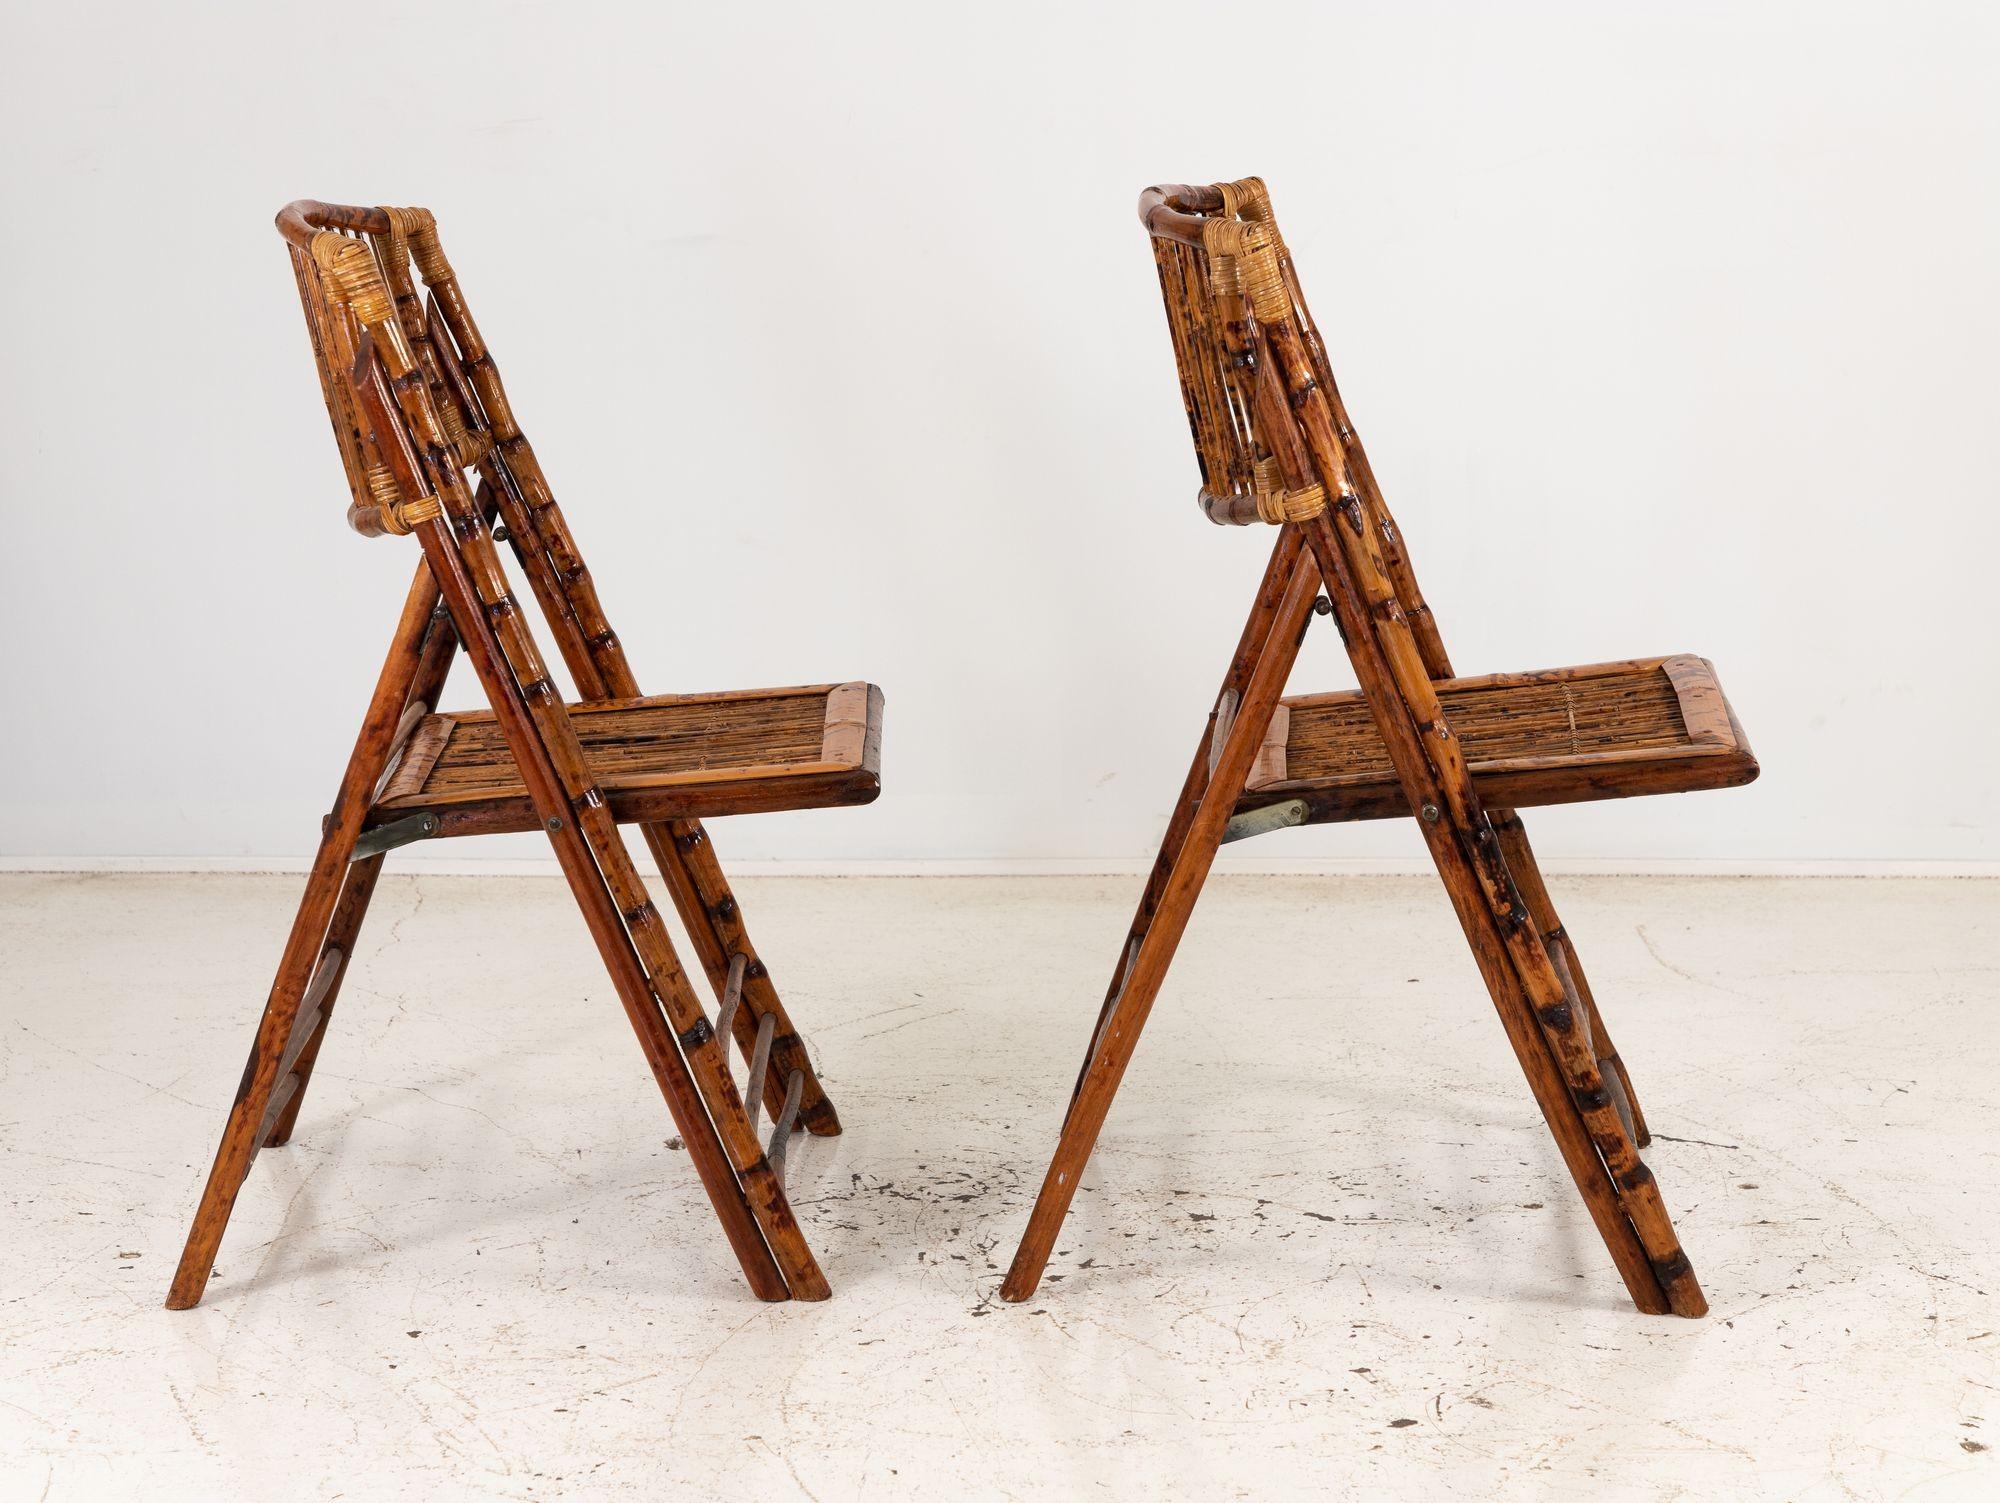 This lovely pair of folding garden chairs are crafted with the timeless beauty of bamboo. These green-friendly chairs seamlessly blend natural elegance with practical functionality. The bamboo frames provide exceptional durability while exuding a